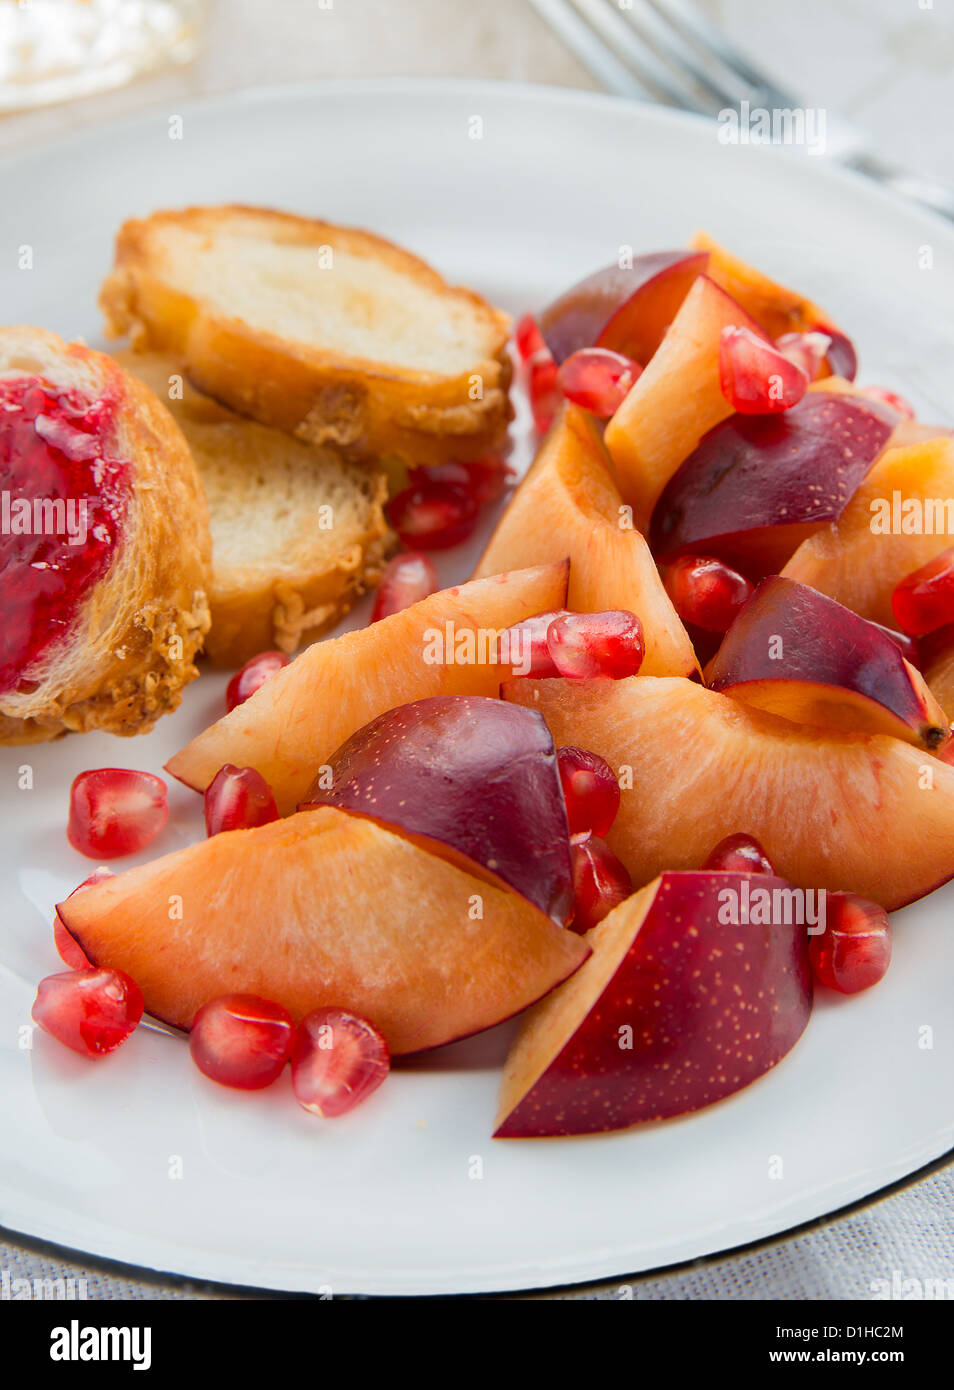 Sliced plum and pomegranate seeds on plate Stock Photo